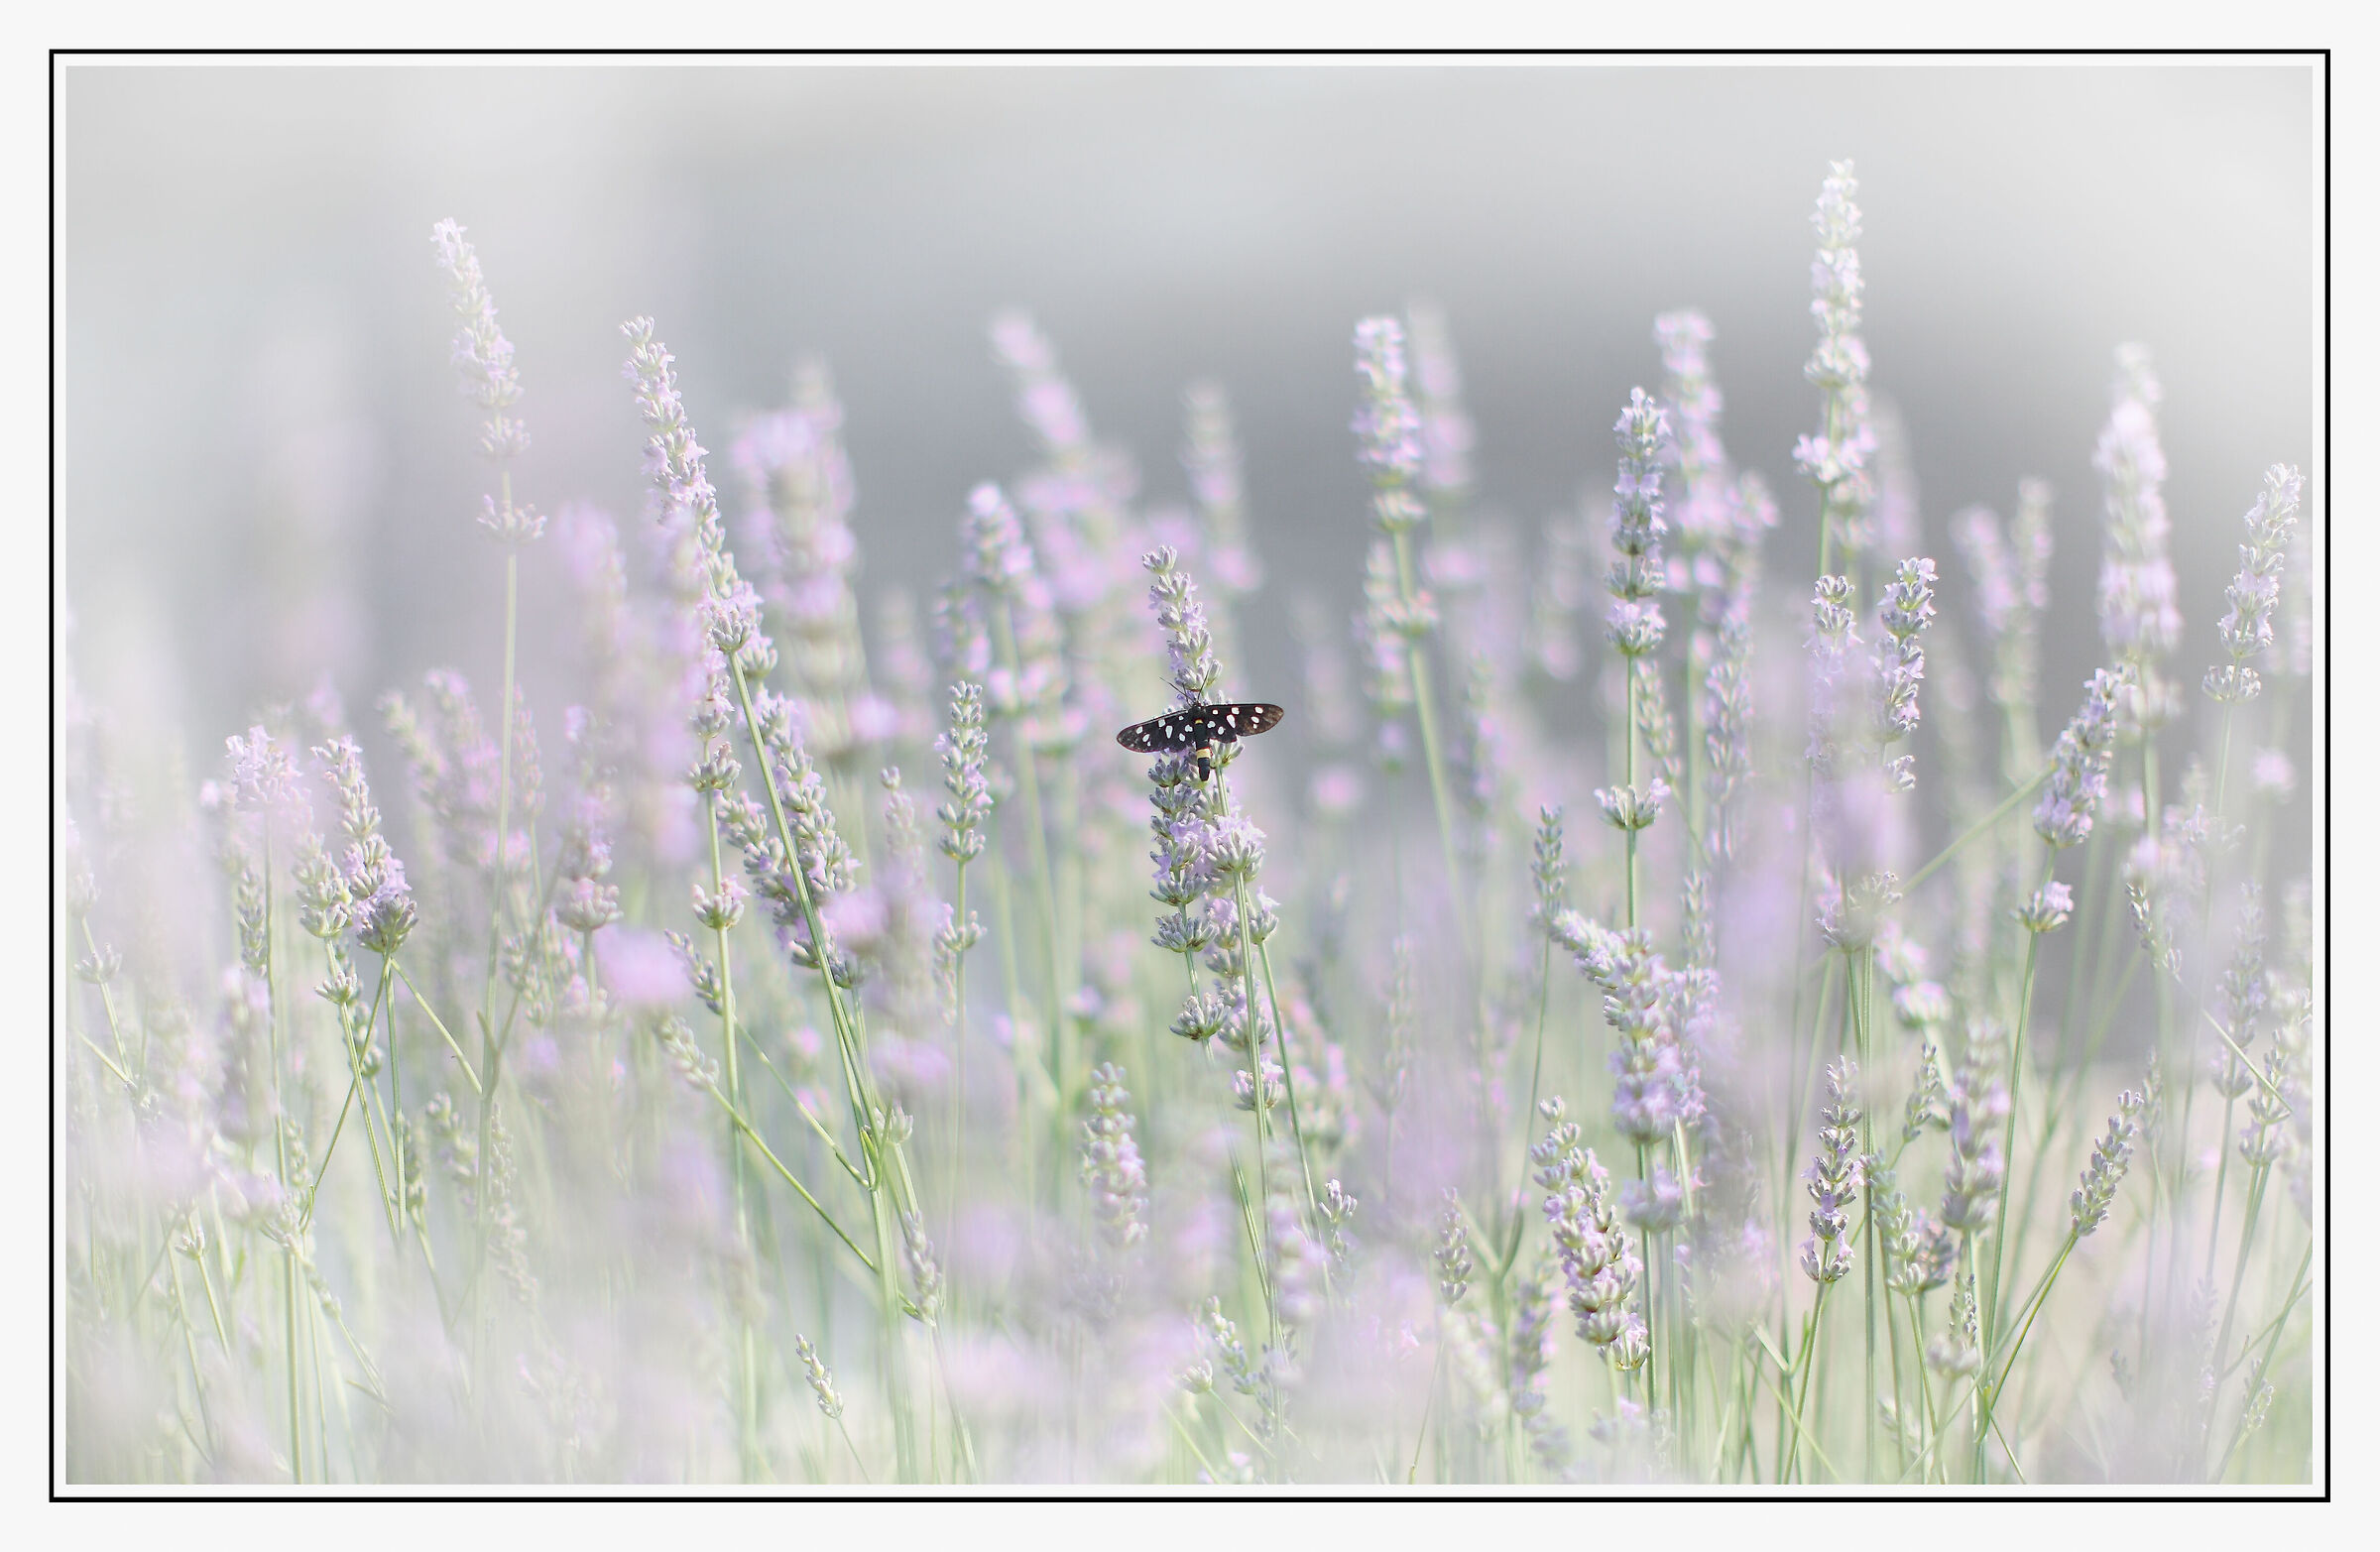 Among the lavender...